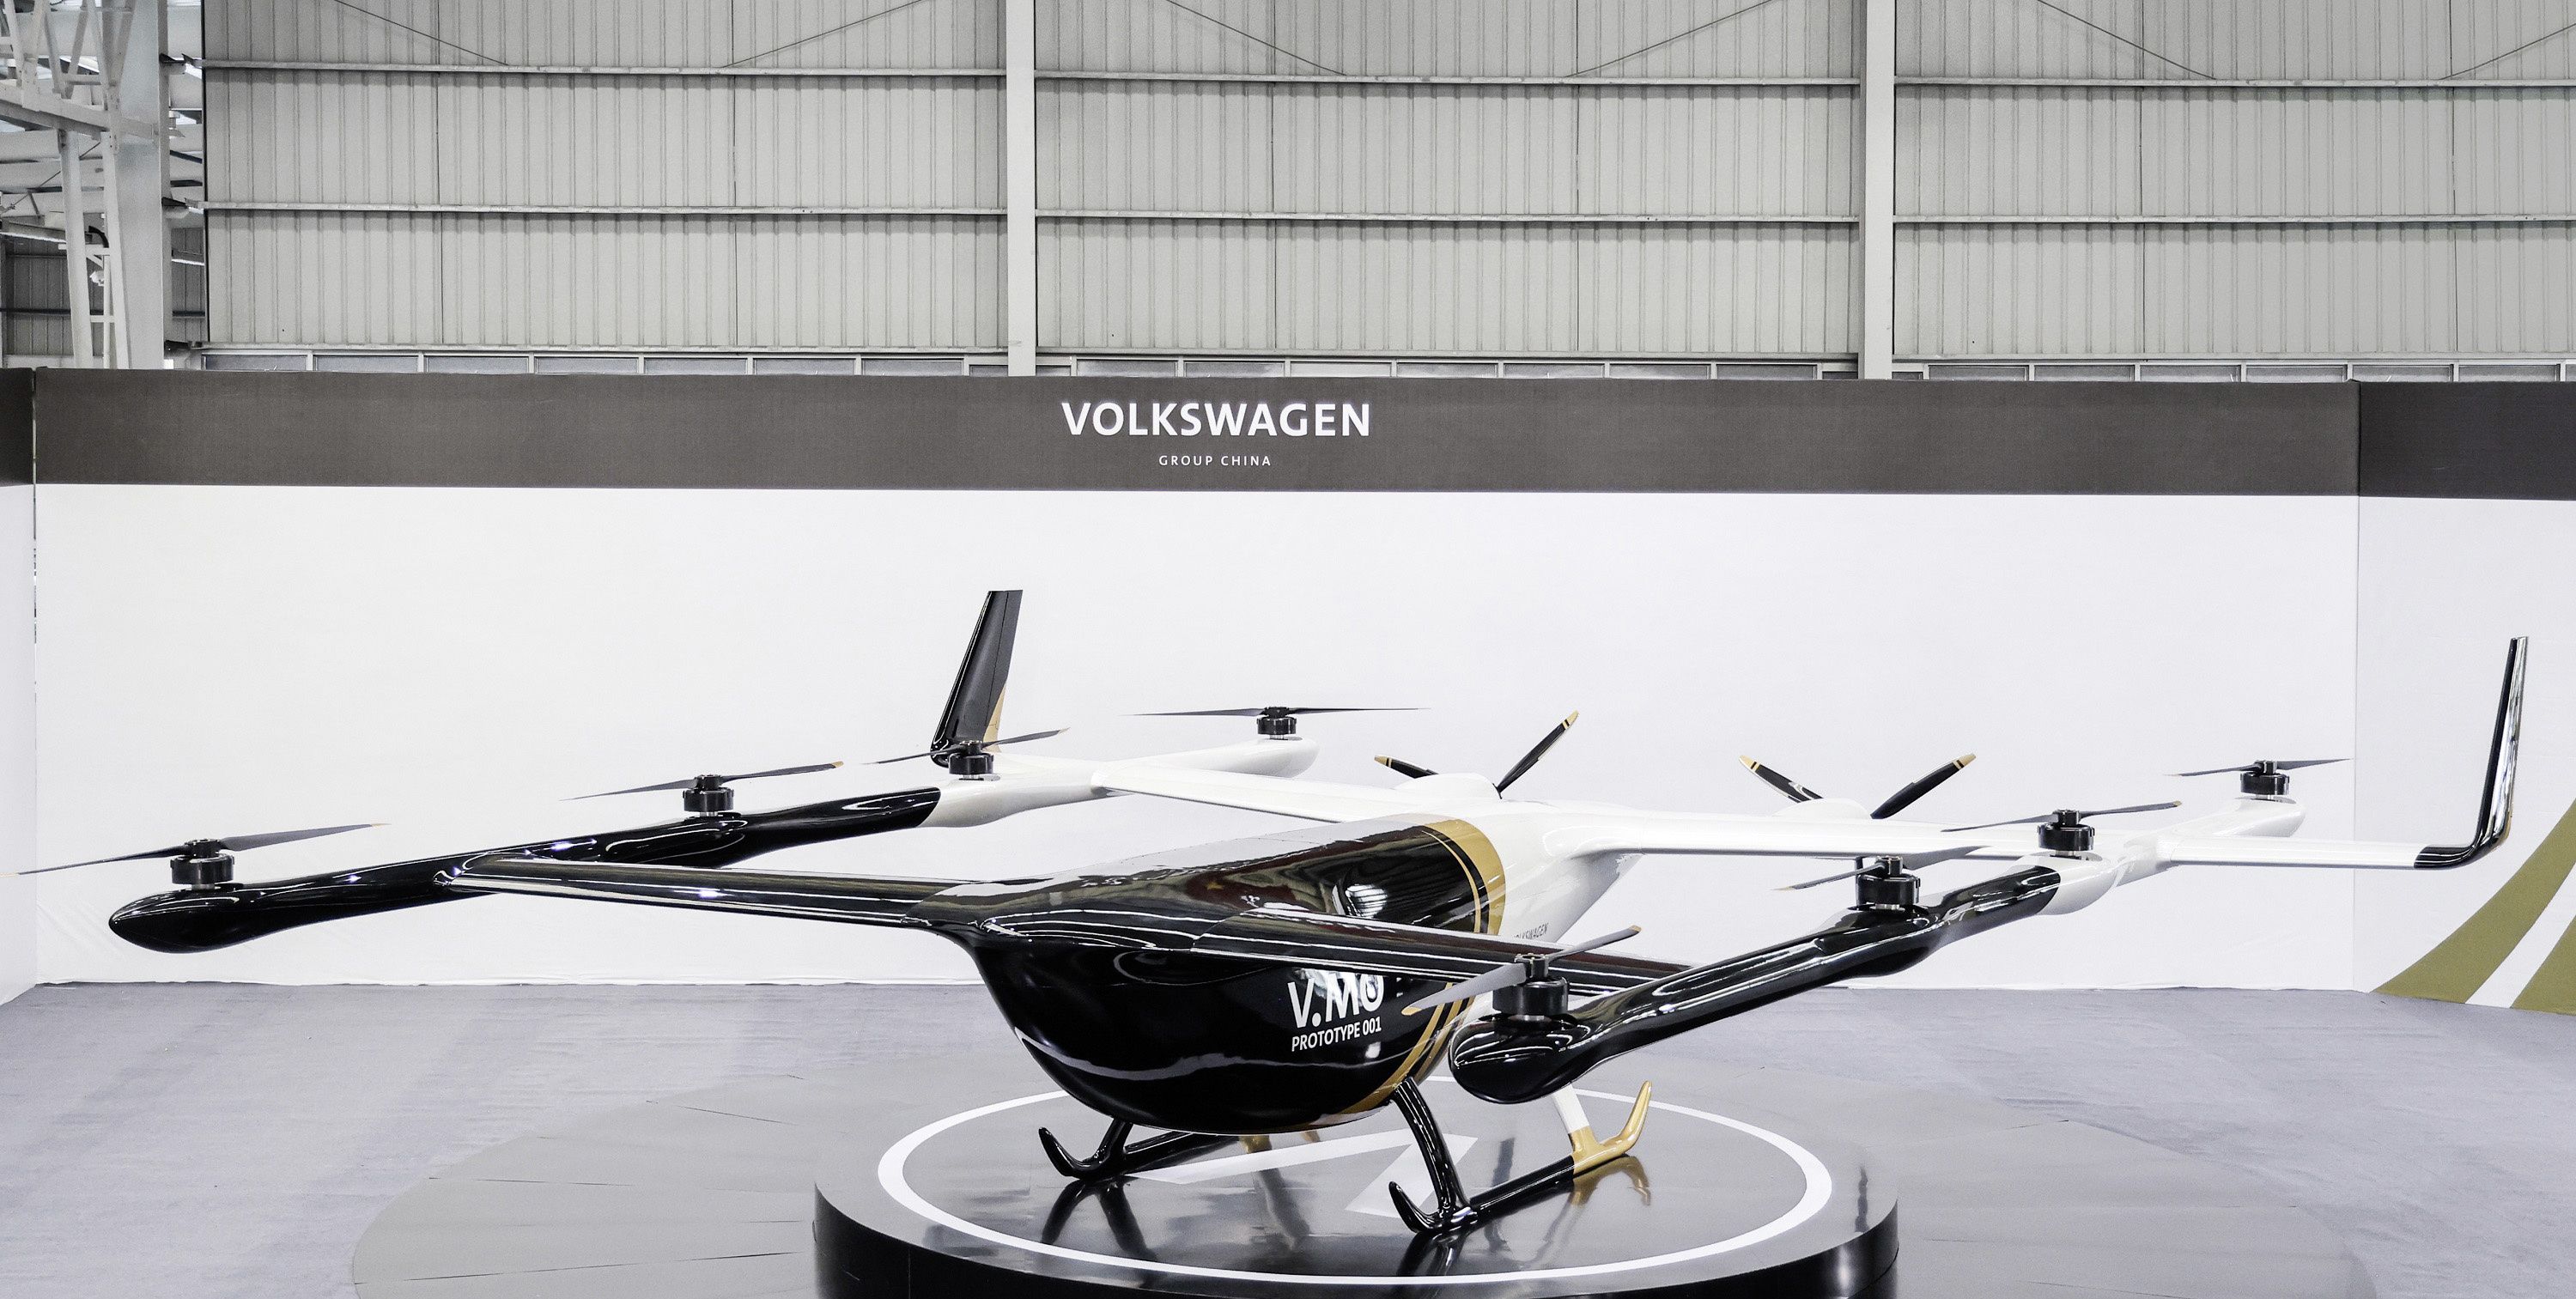 VW Is Bullish on Electric Air Taxis for VIPs